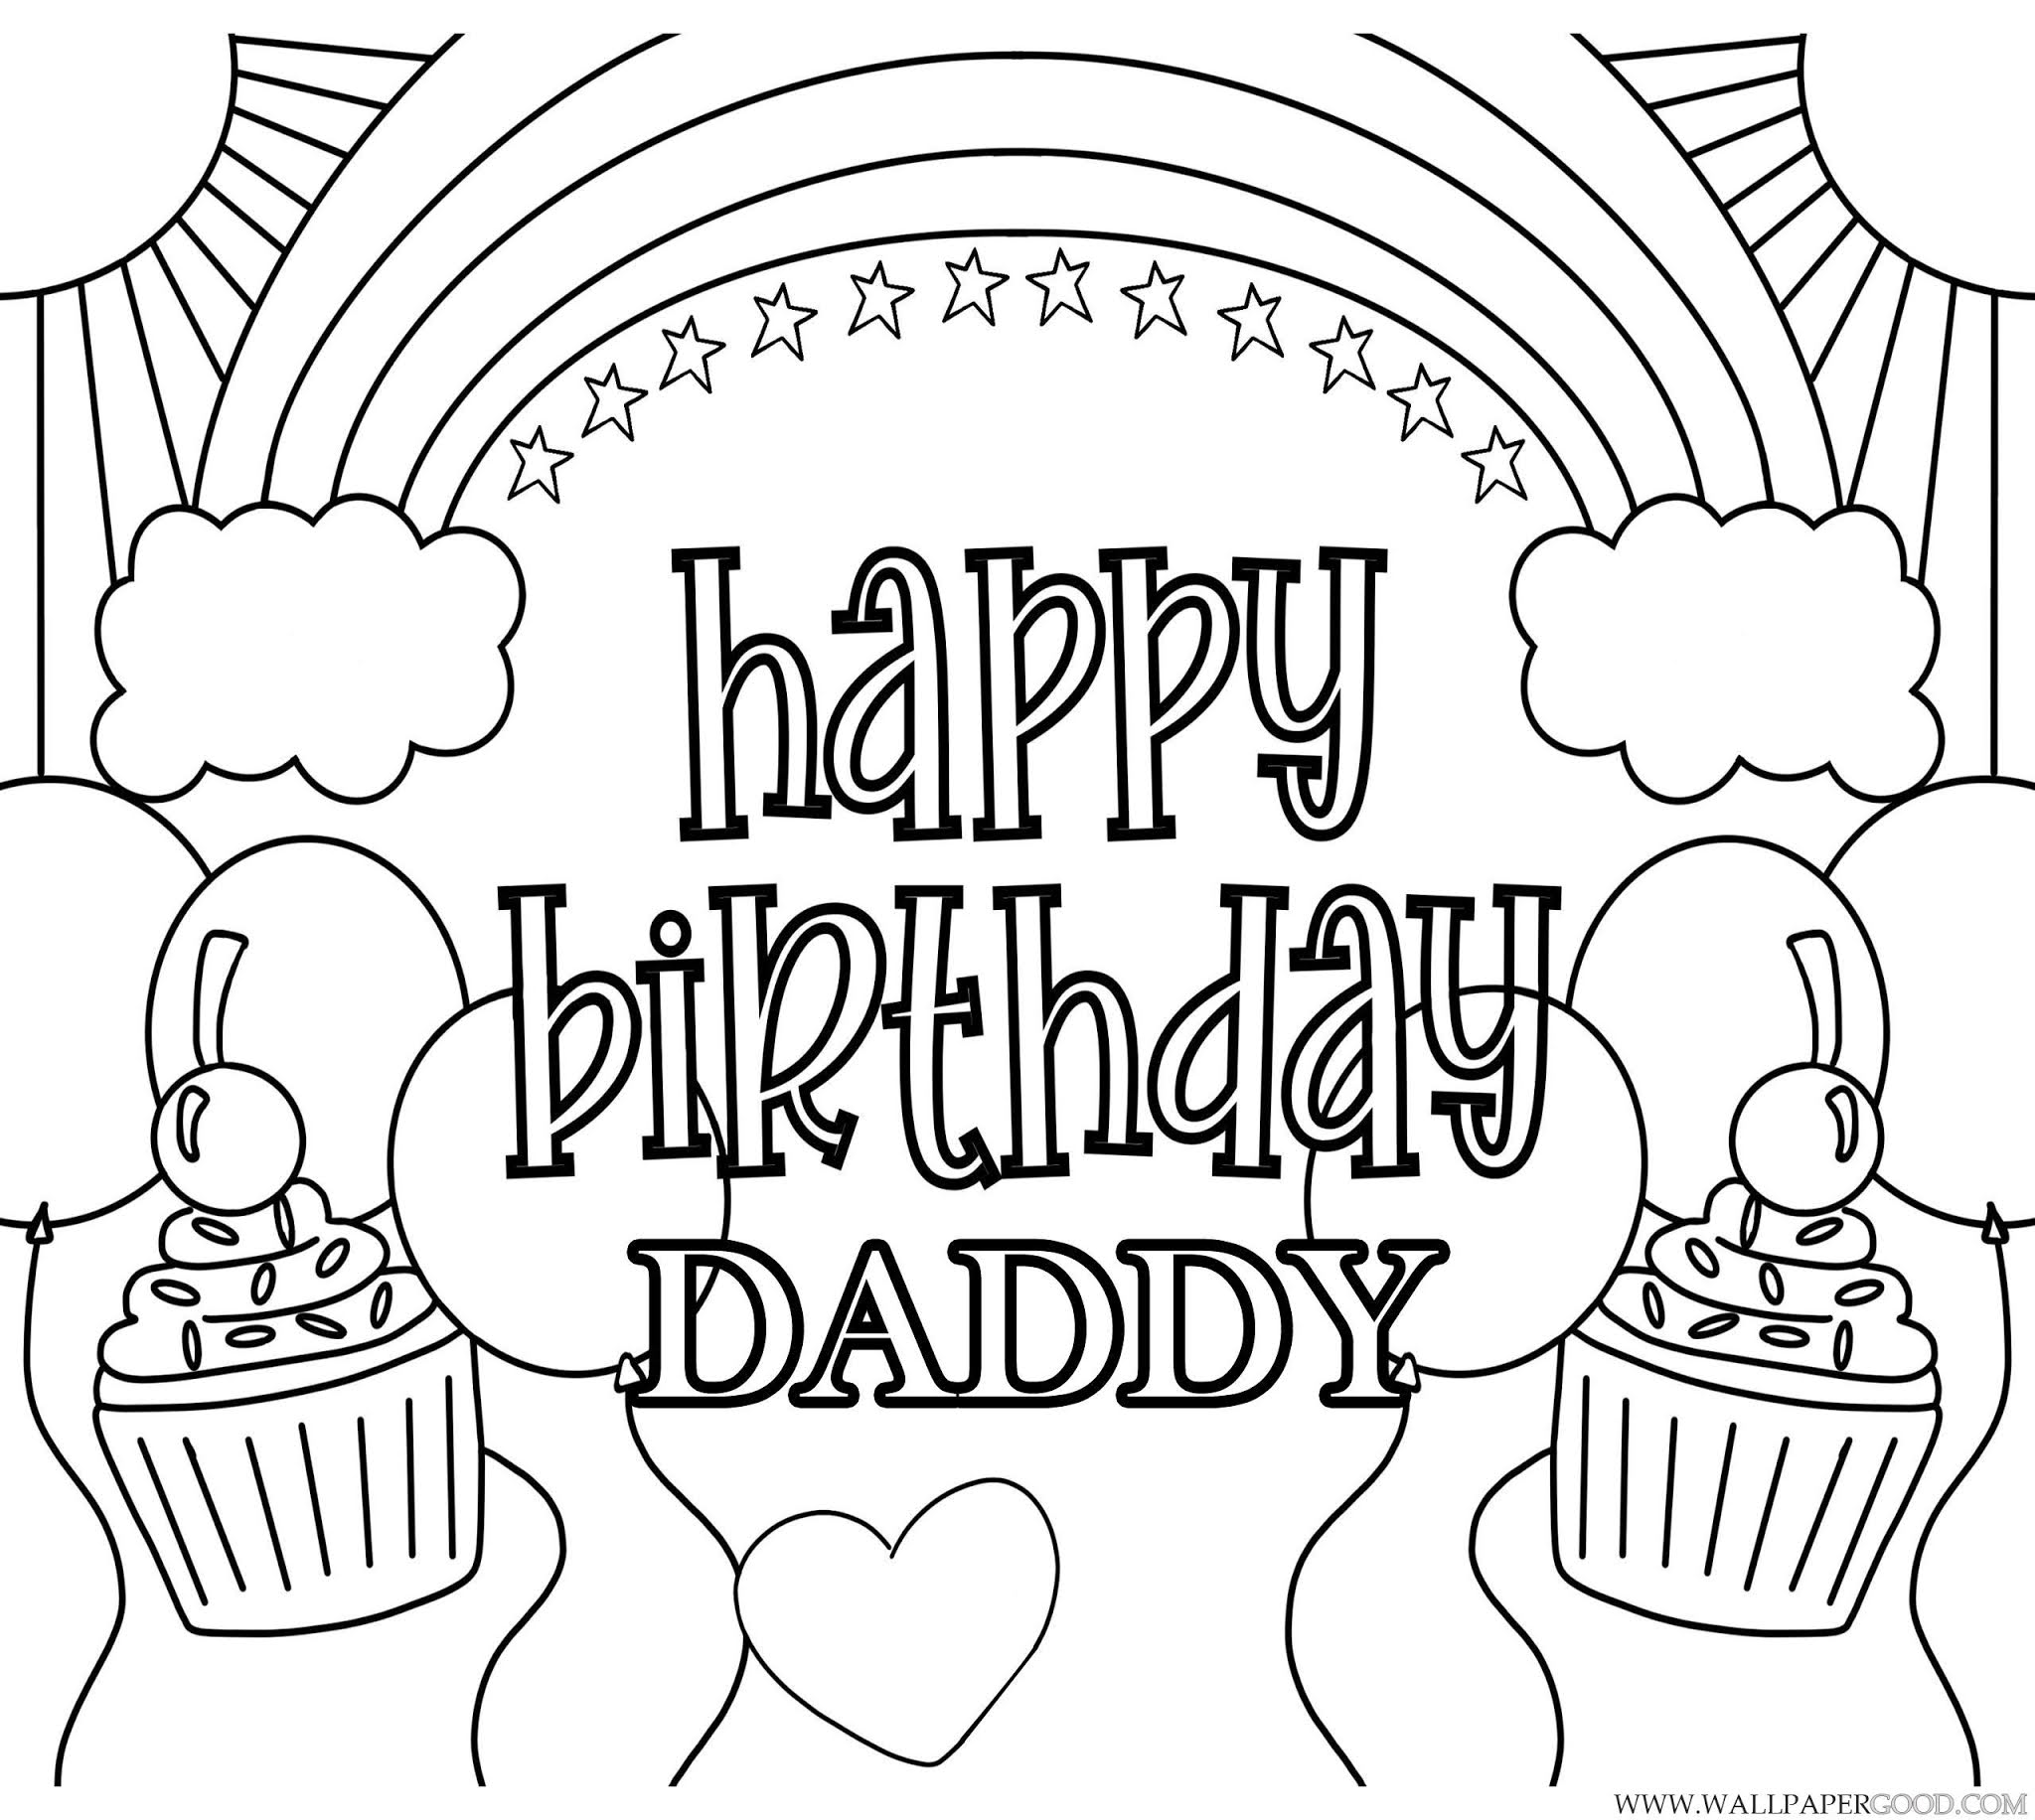 Free Printable Birthday Cards For Dad To Color